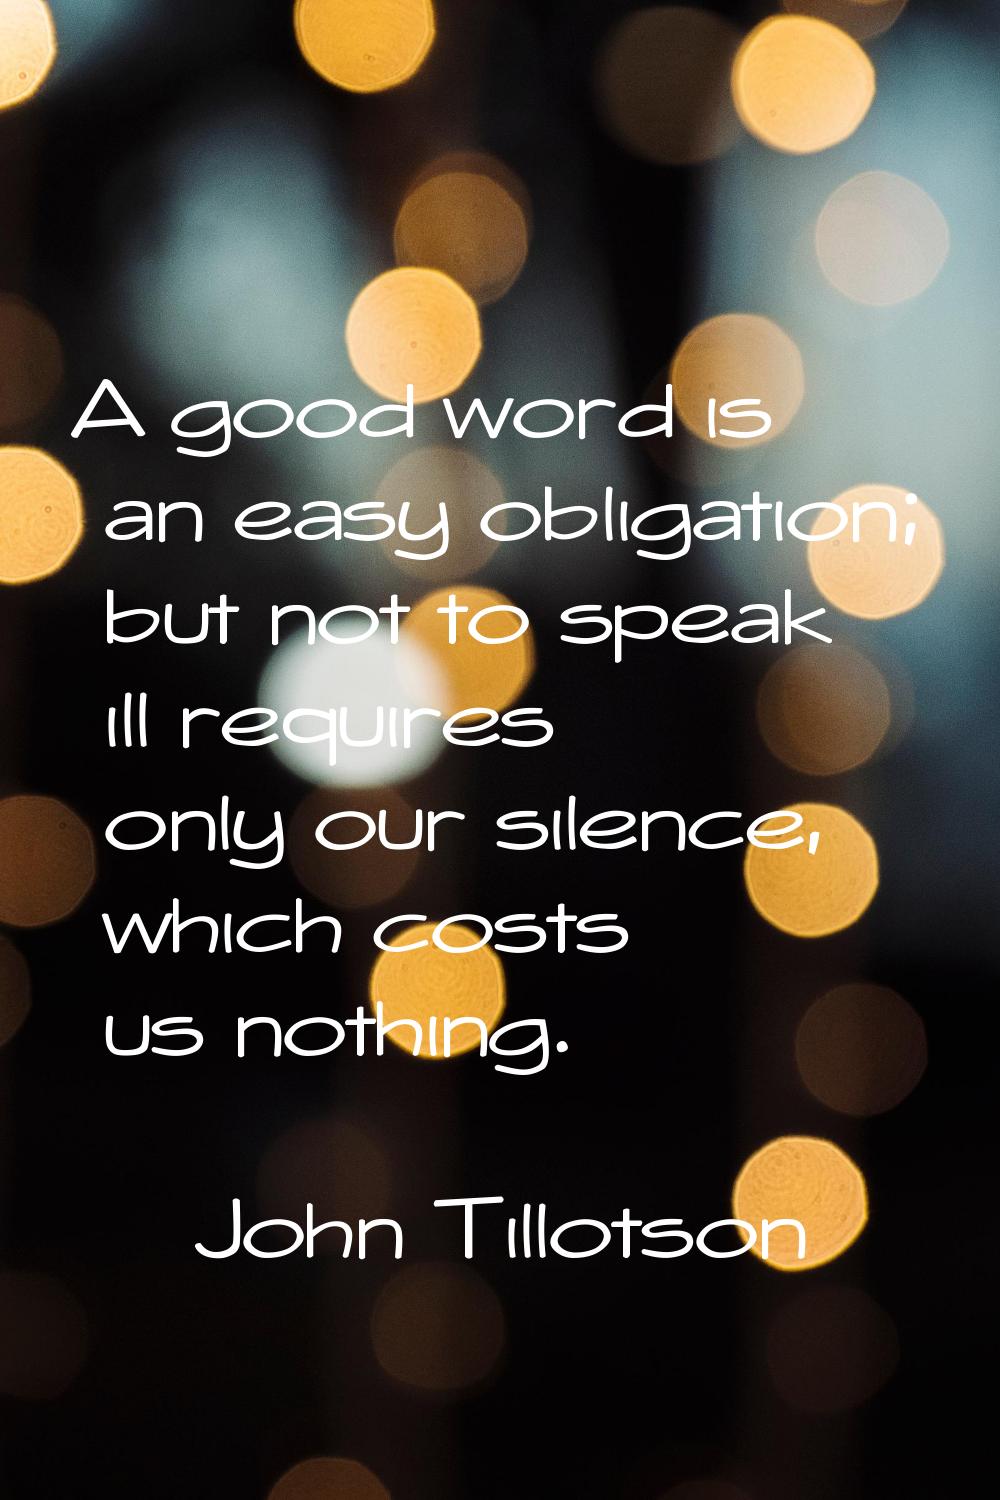 A good word is an easy obligation; but not to speak ill requires only our silence, which costs us n